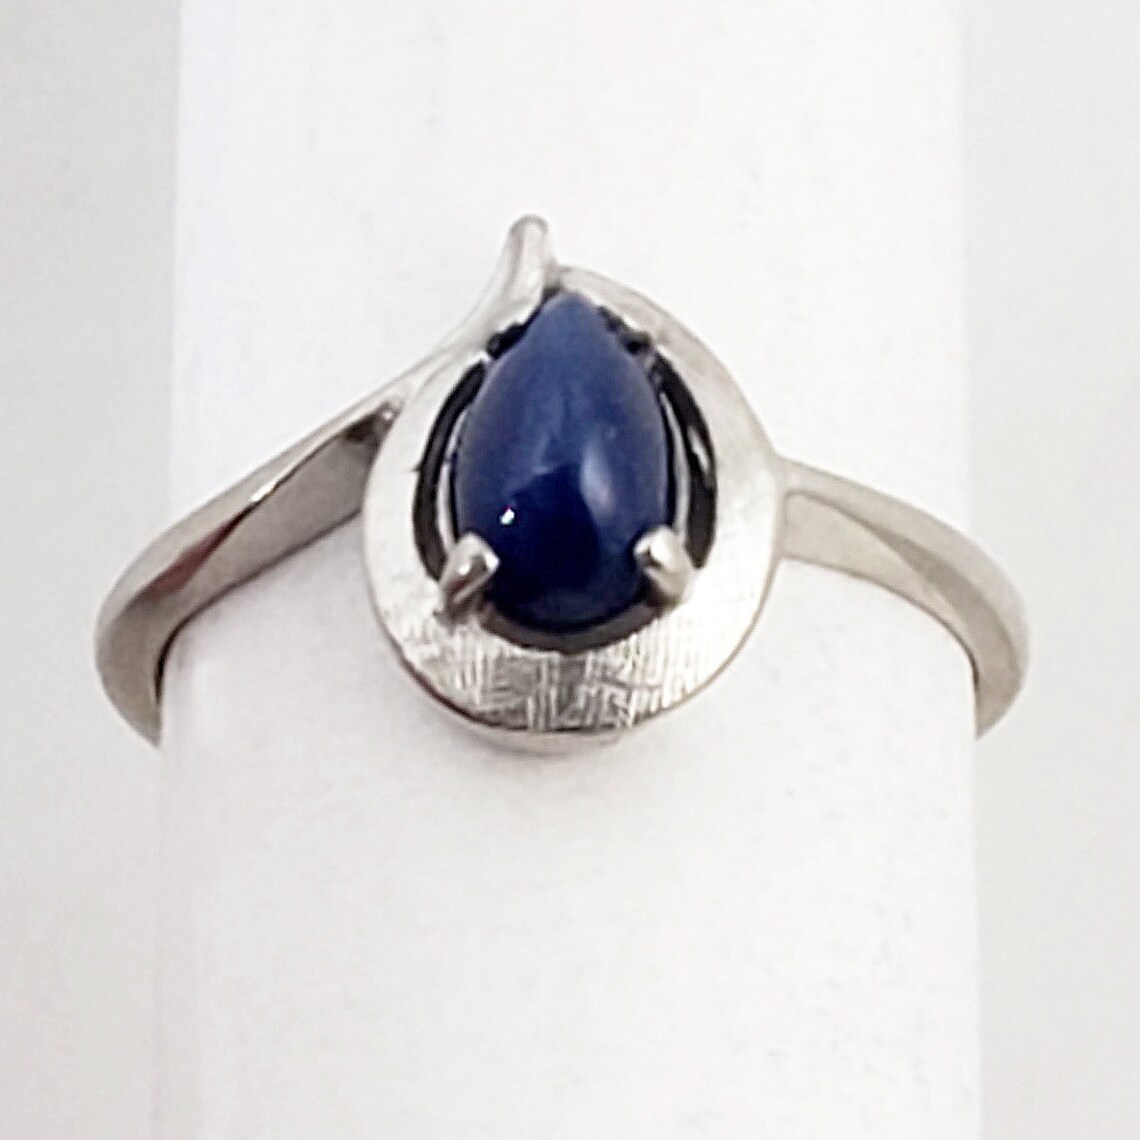 14K White Gold and Star Sapphire Teardrop Ring Size 8 | Etsy